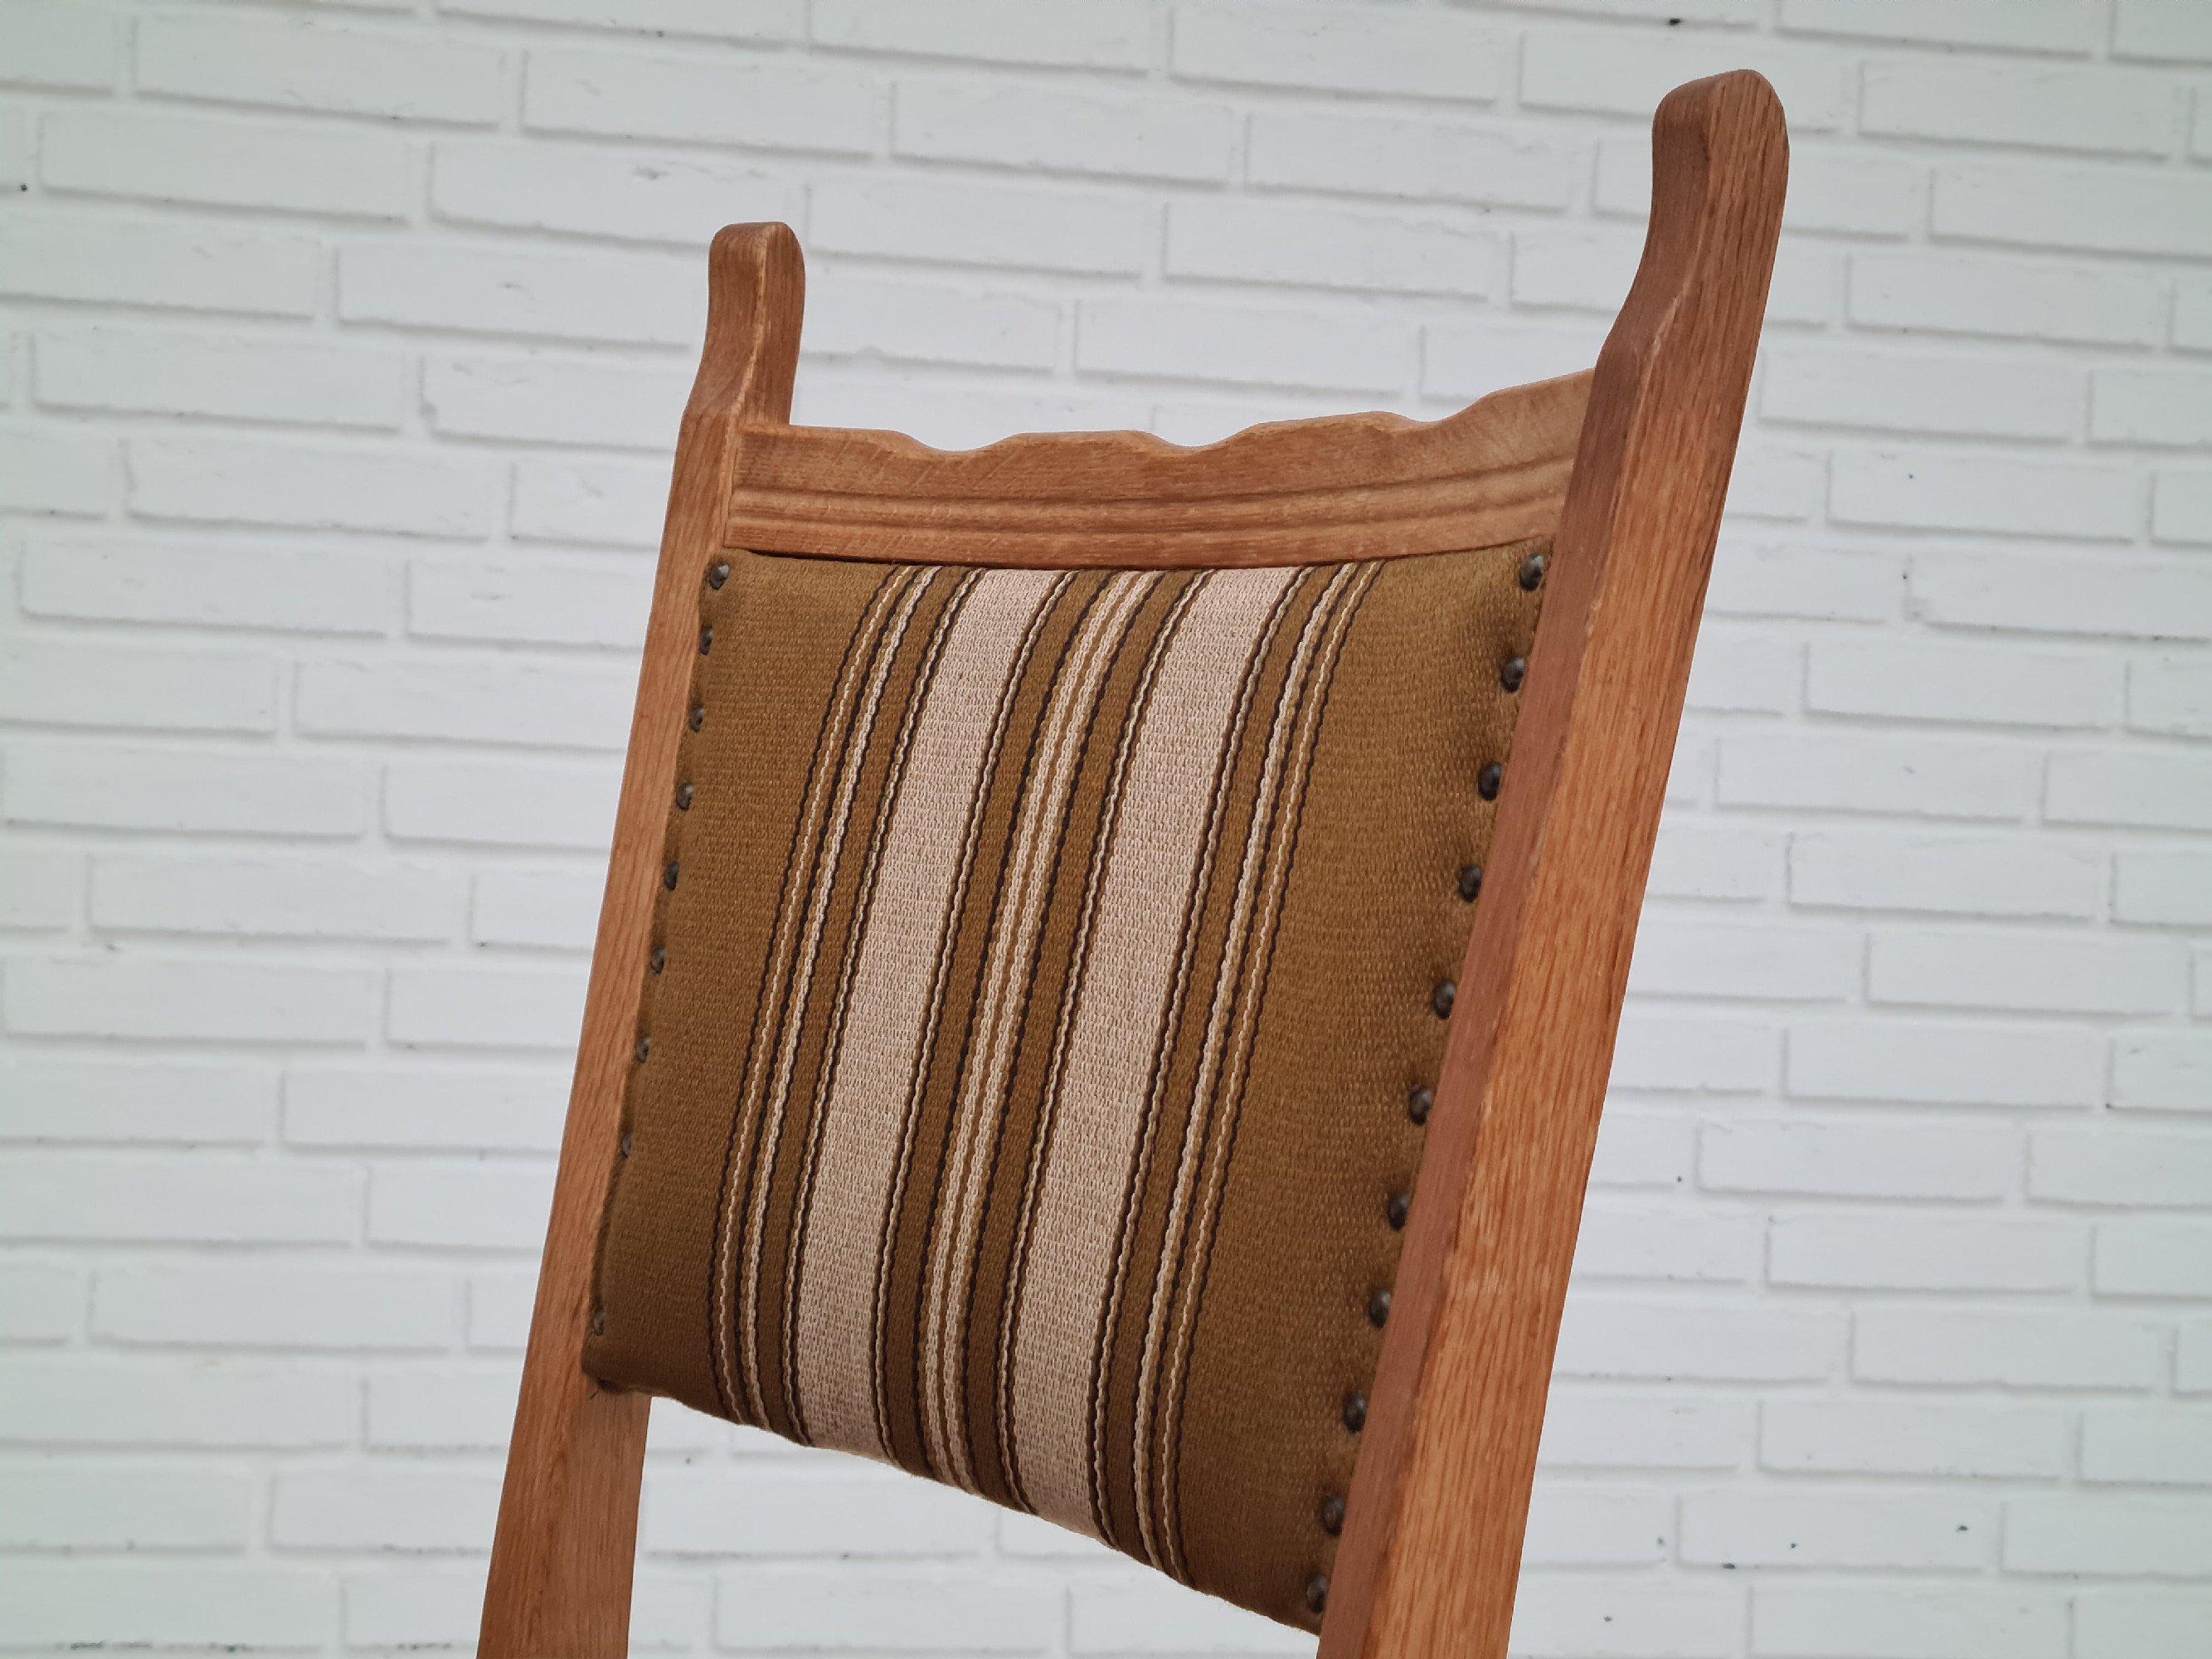 Original Danish design in Henning Kjærnulf style from about 1960s, set of chairs (6 pcs), oak wood, seat and back: furniture wool, original very good condition.
Chair checked by professional craftsman.